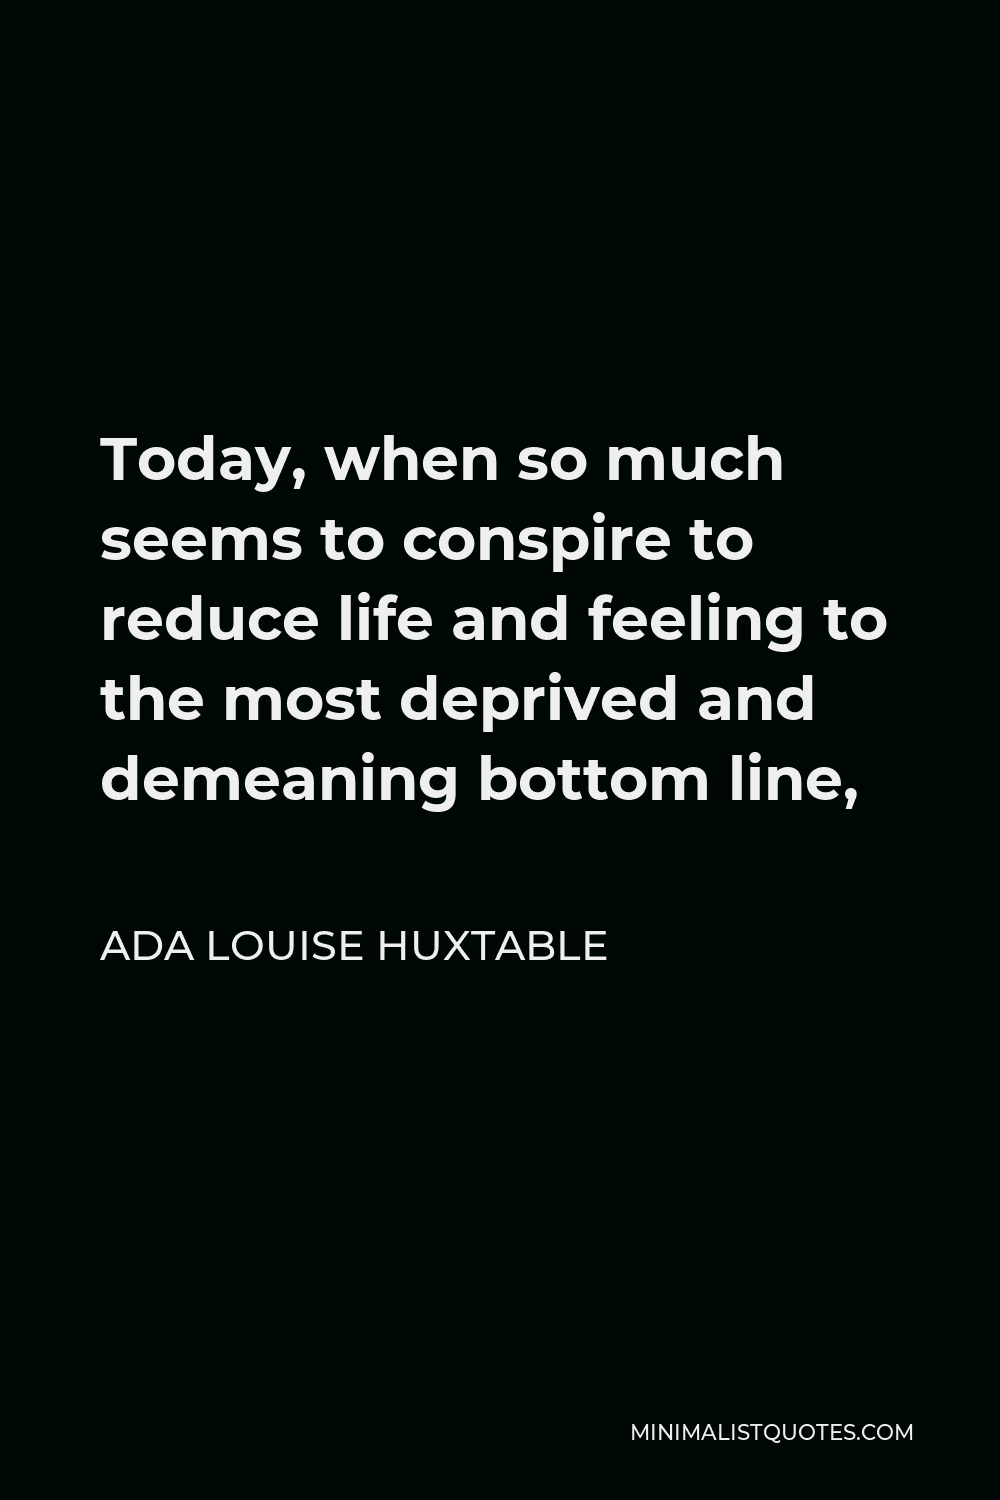 Ada Louise Huxtable Quote - Today, when so much seems to conspire to reduce life and feeling to the most deprived and demeaning bottom line,